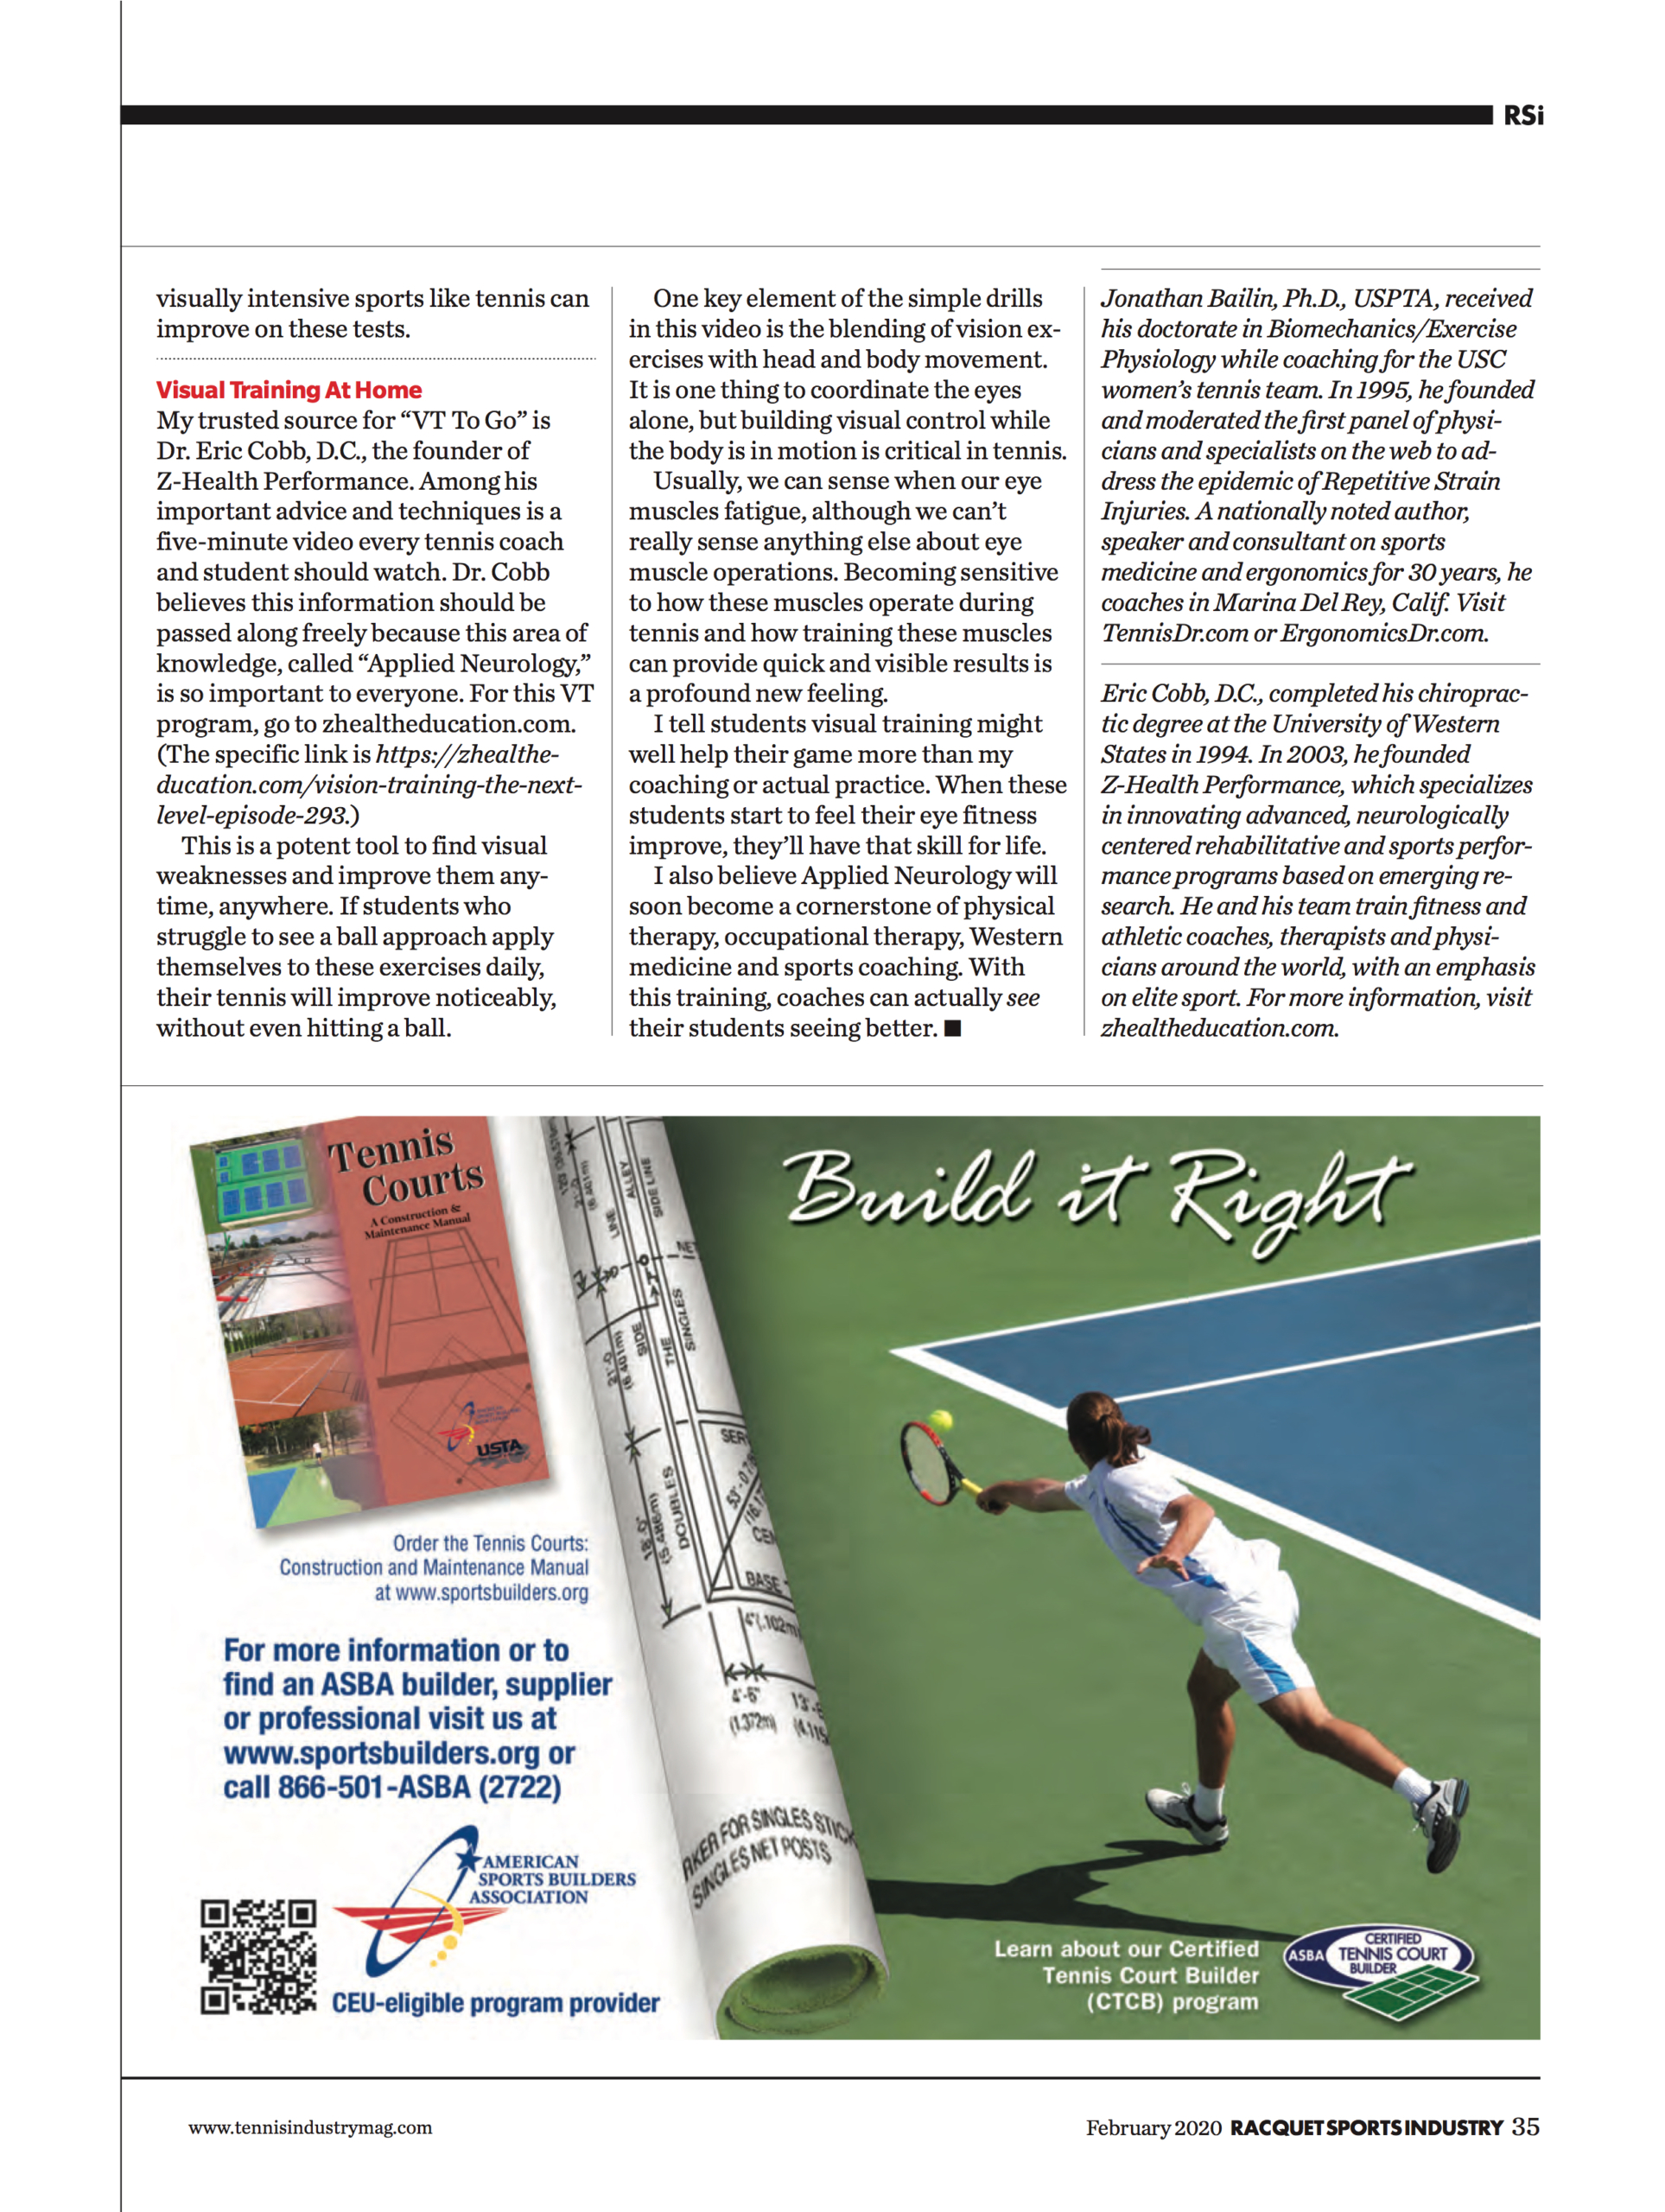 These publications in RSI magazine are aimed at those who struggle with tracking a tennis ball and help their coaches.  Much of content is needed because of the pervasive overuse of  screens.   